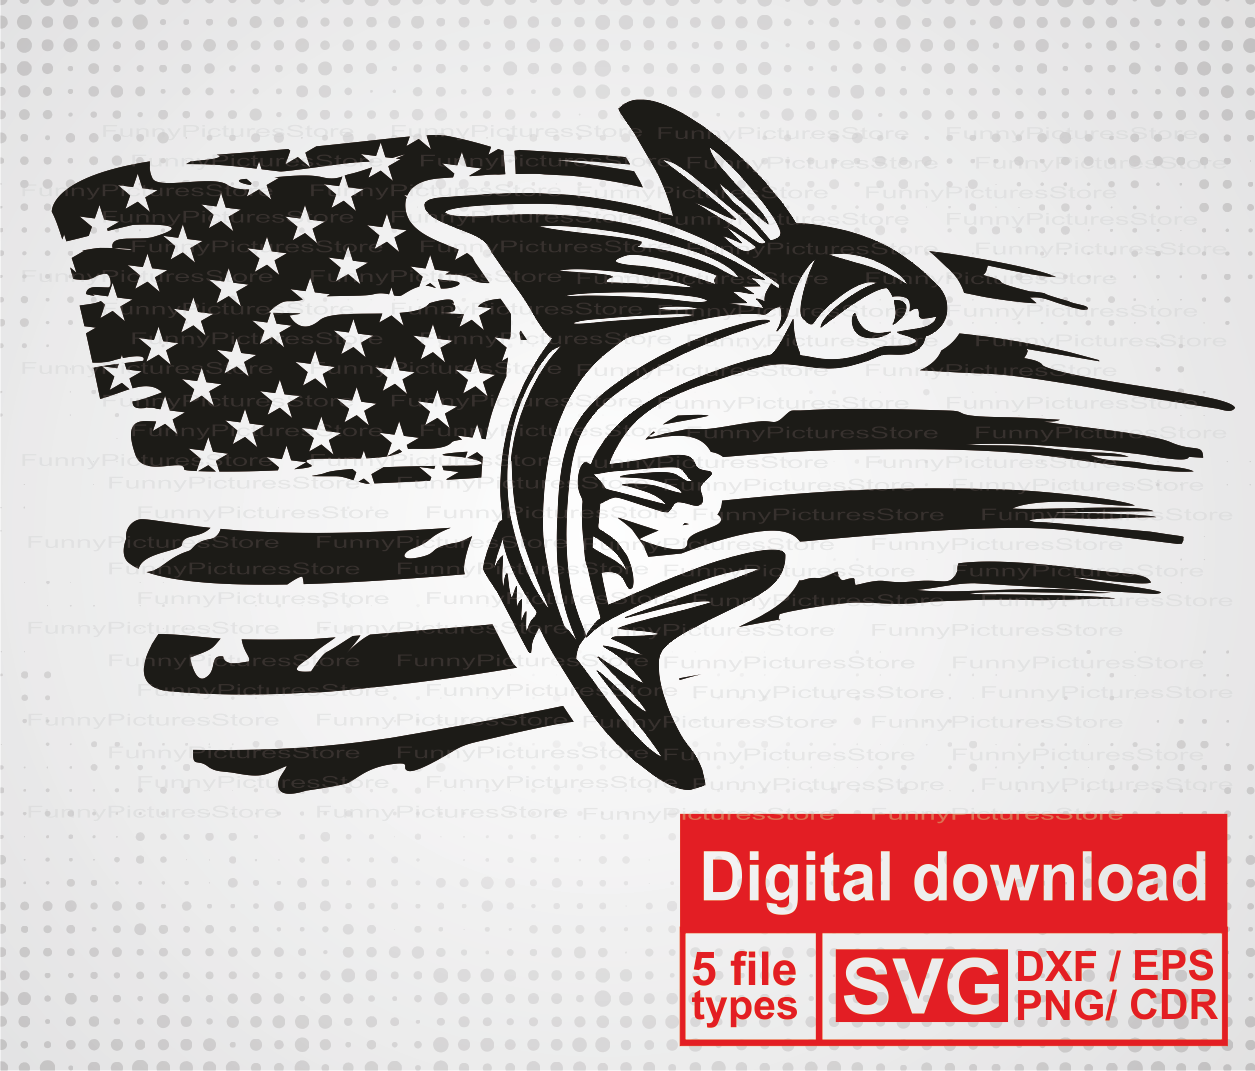 Download Distressed American Flag Svg Fish Svg Vector Files For Cut Print Engrav Cricket Fishing Clipart Flag Silhouette Fish Fishing Svg